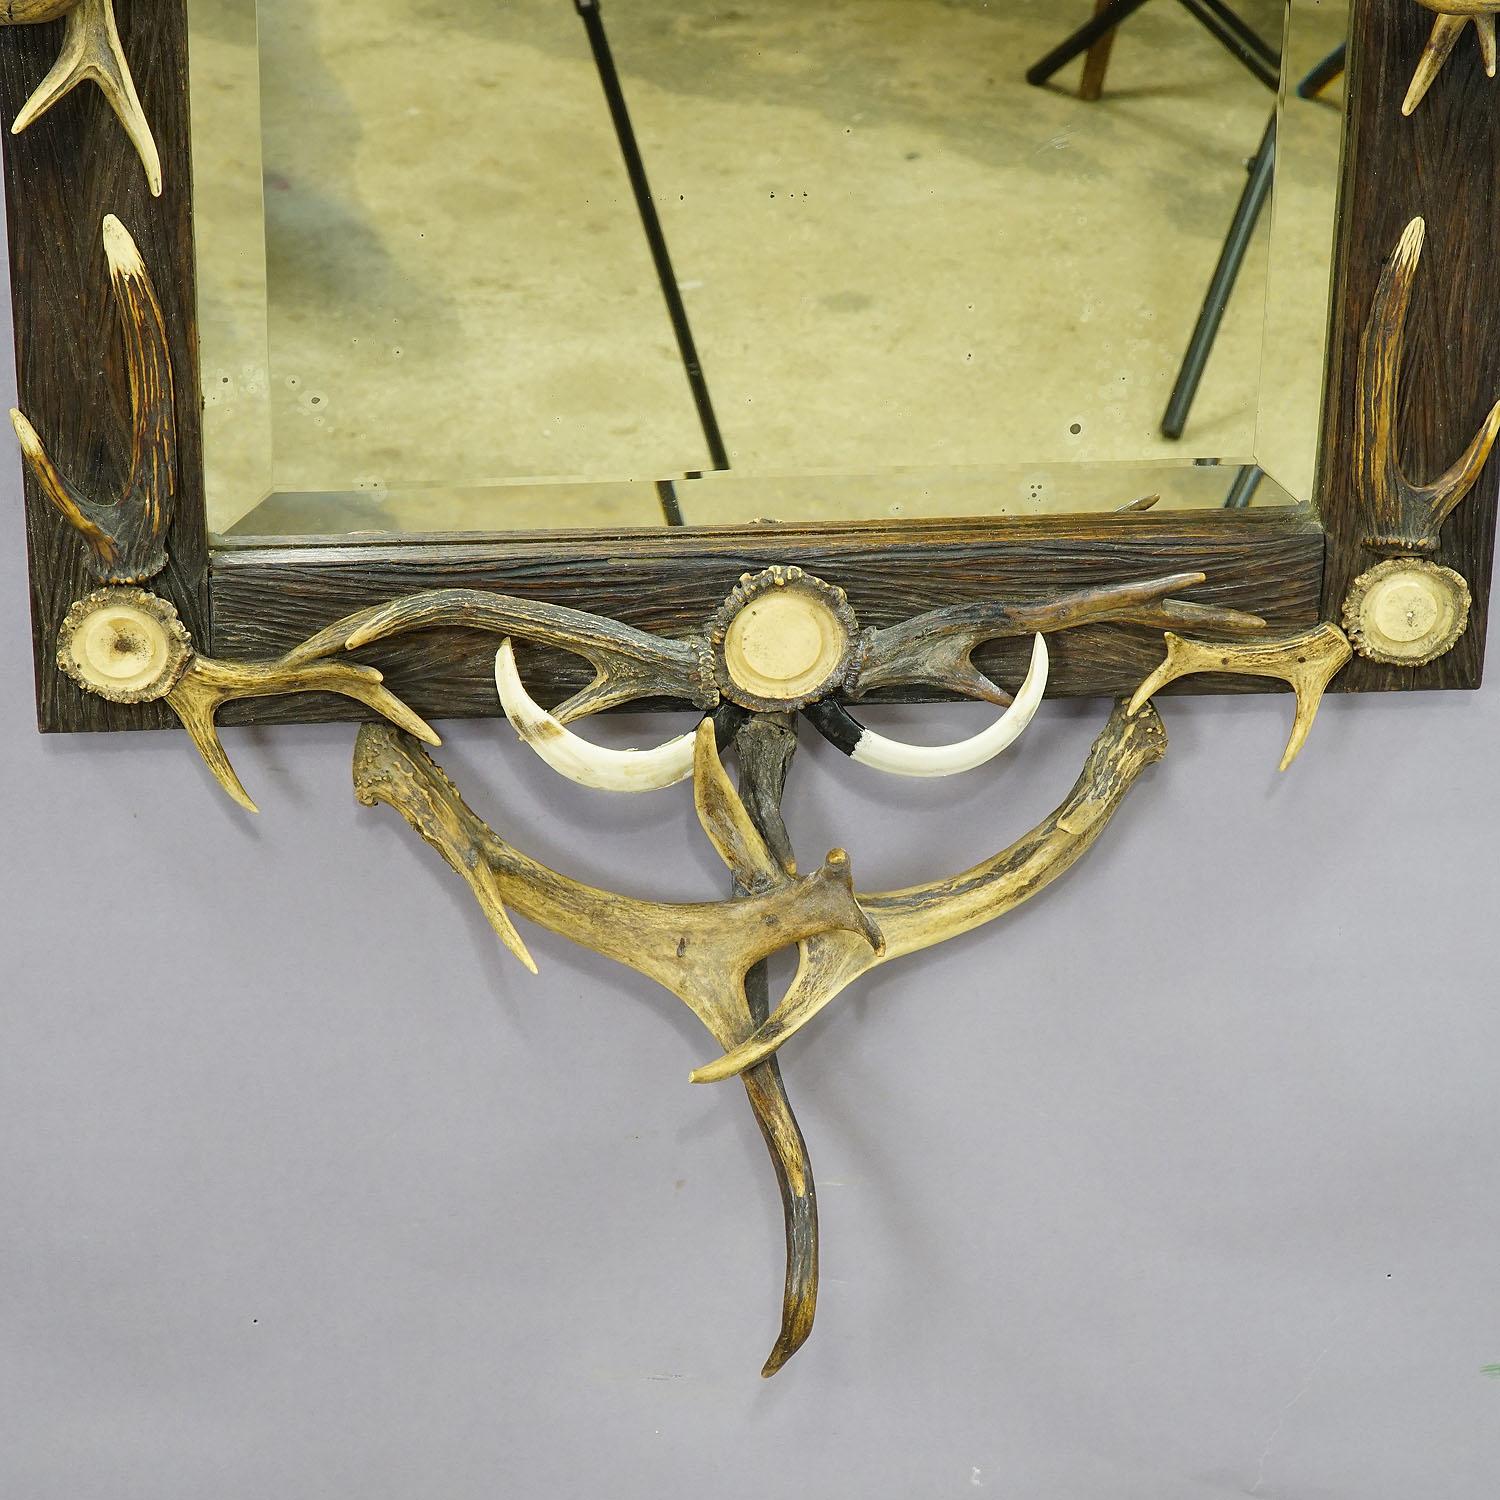 Carved Large Antique Mirror with Rustic Antler Decorations For Sale